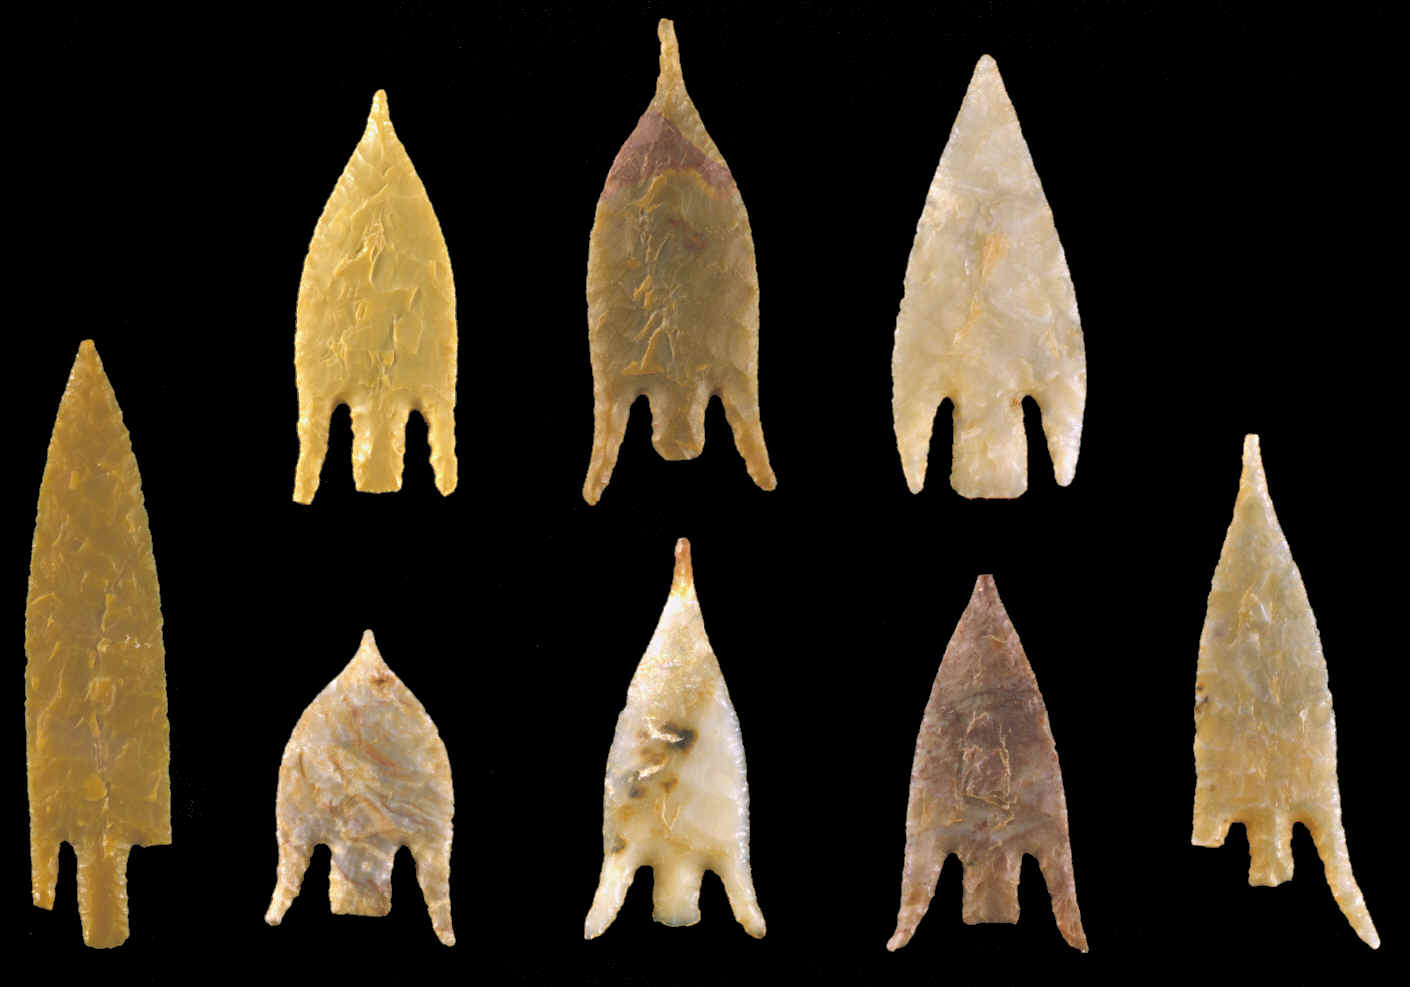 Eight Fan-Eared points from Sub-Sahara, Africa.